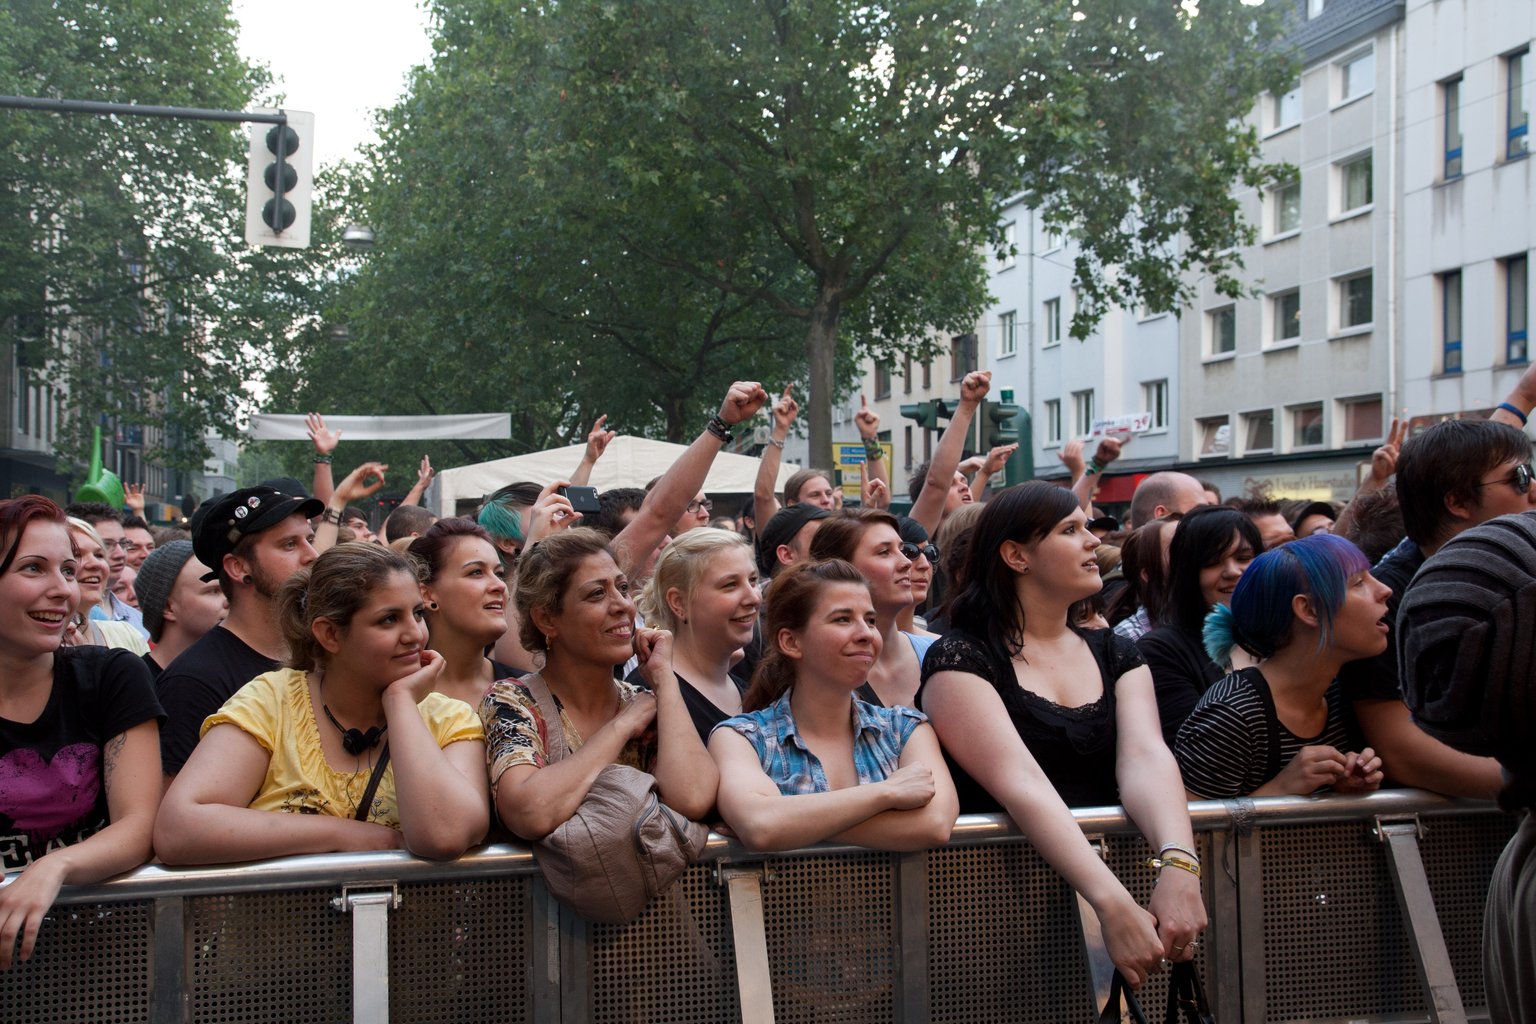 Young mostly female crowd standing behind the barrier, lots of dreamy faces